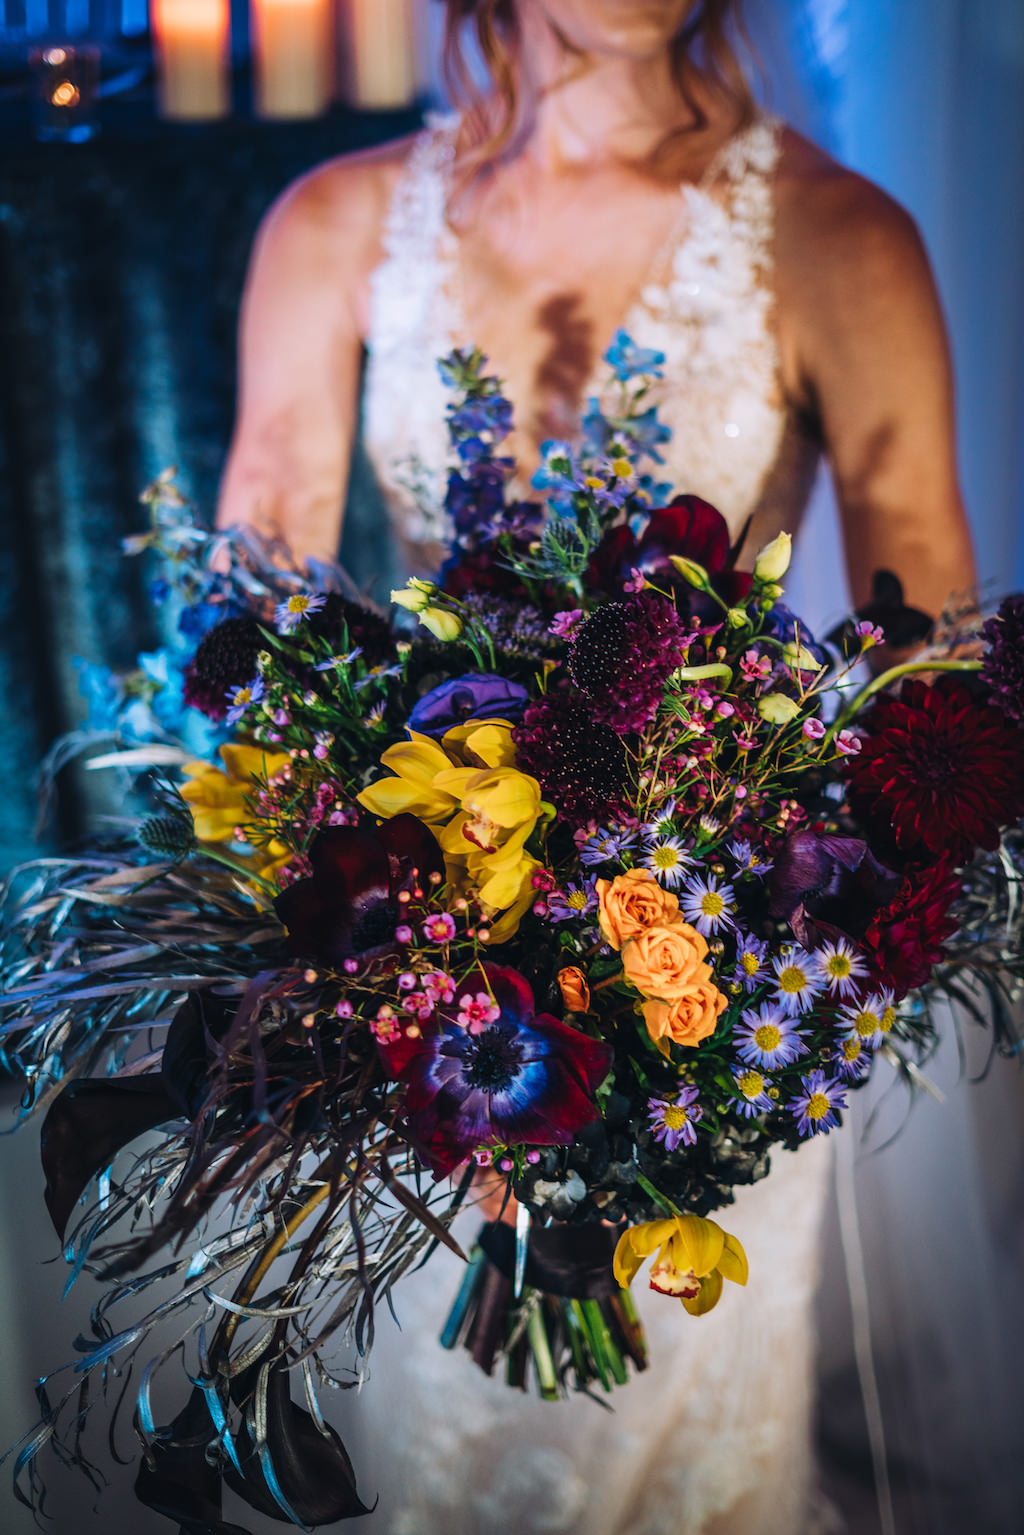 Bride Holding Unique Dramatic Dark Purple, Burgundy, Yellow, Orange Floral Bridal Bouquet | Tampa Bay Wedding Planner Special Moments Event Planner | Styled Shoot